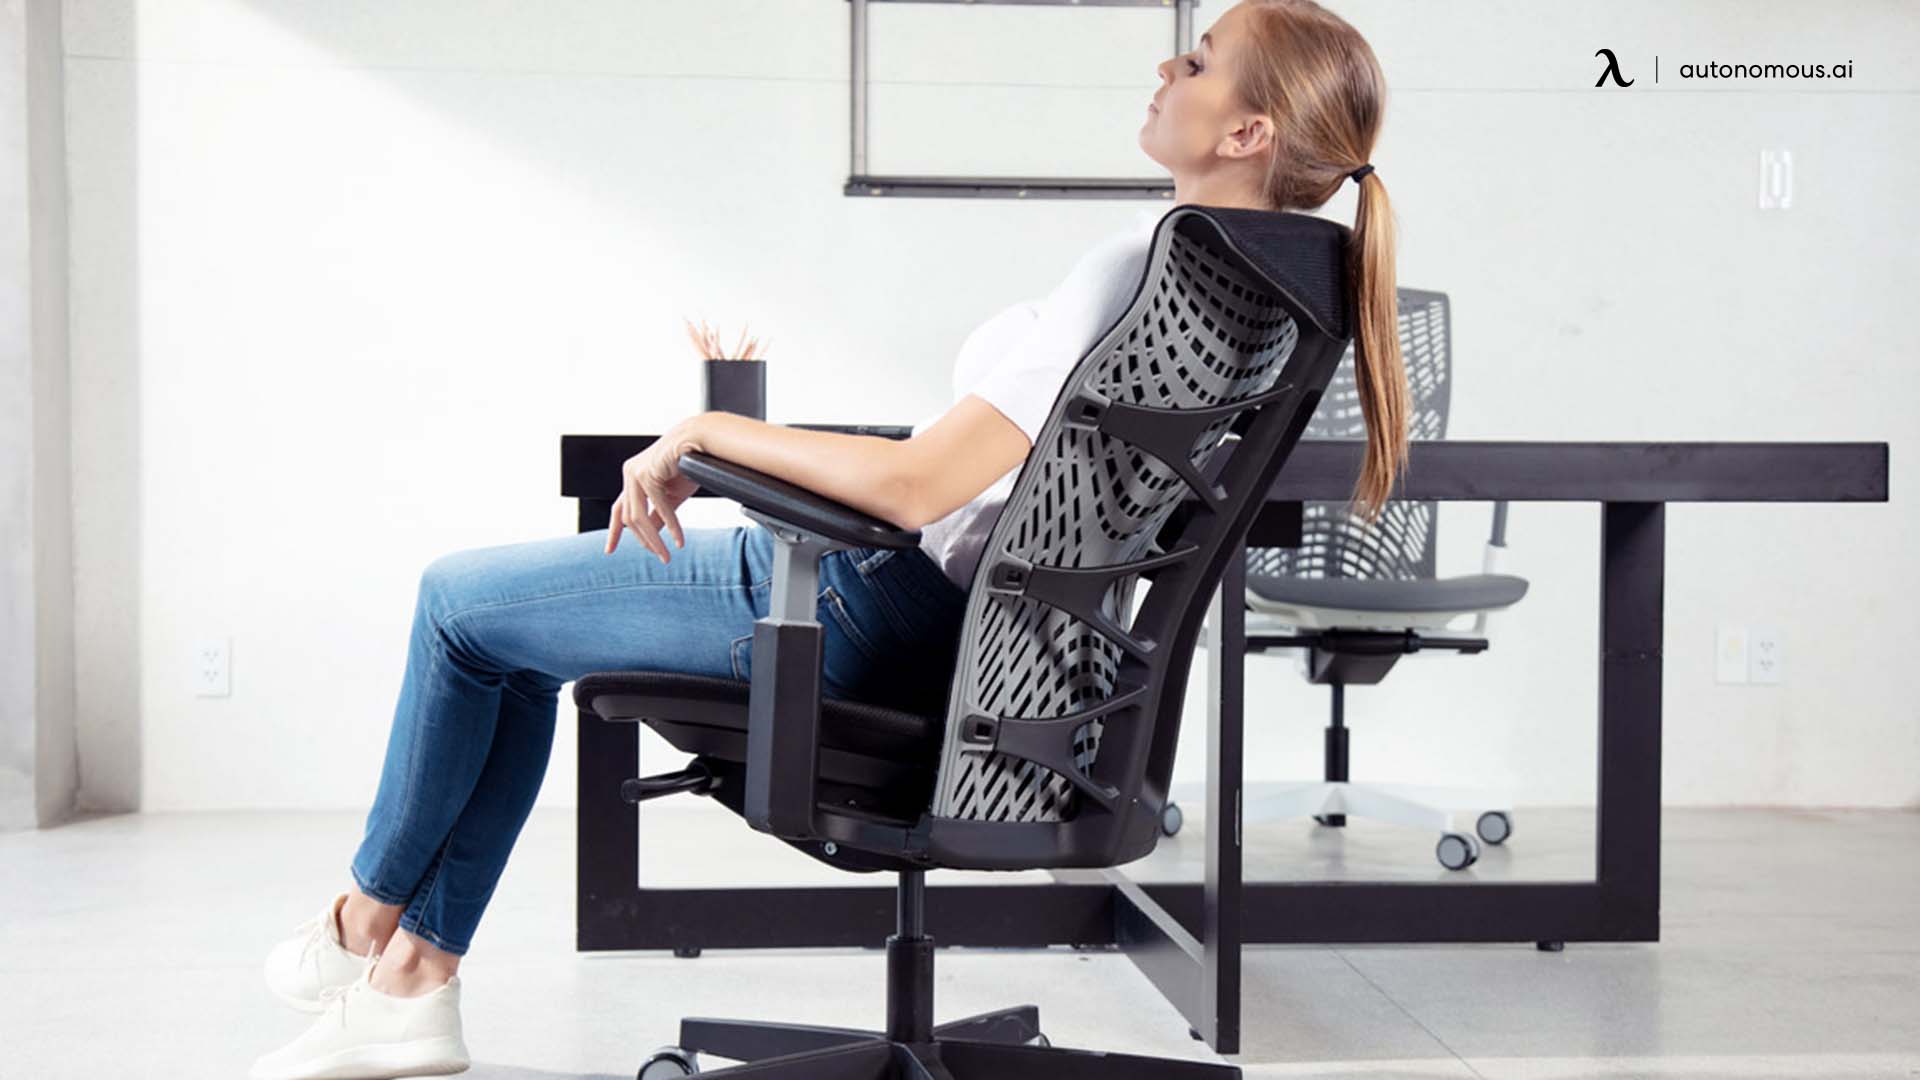 Consider the Return Policy of used office chairs